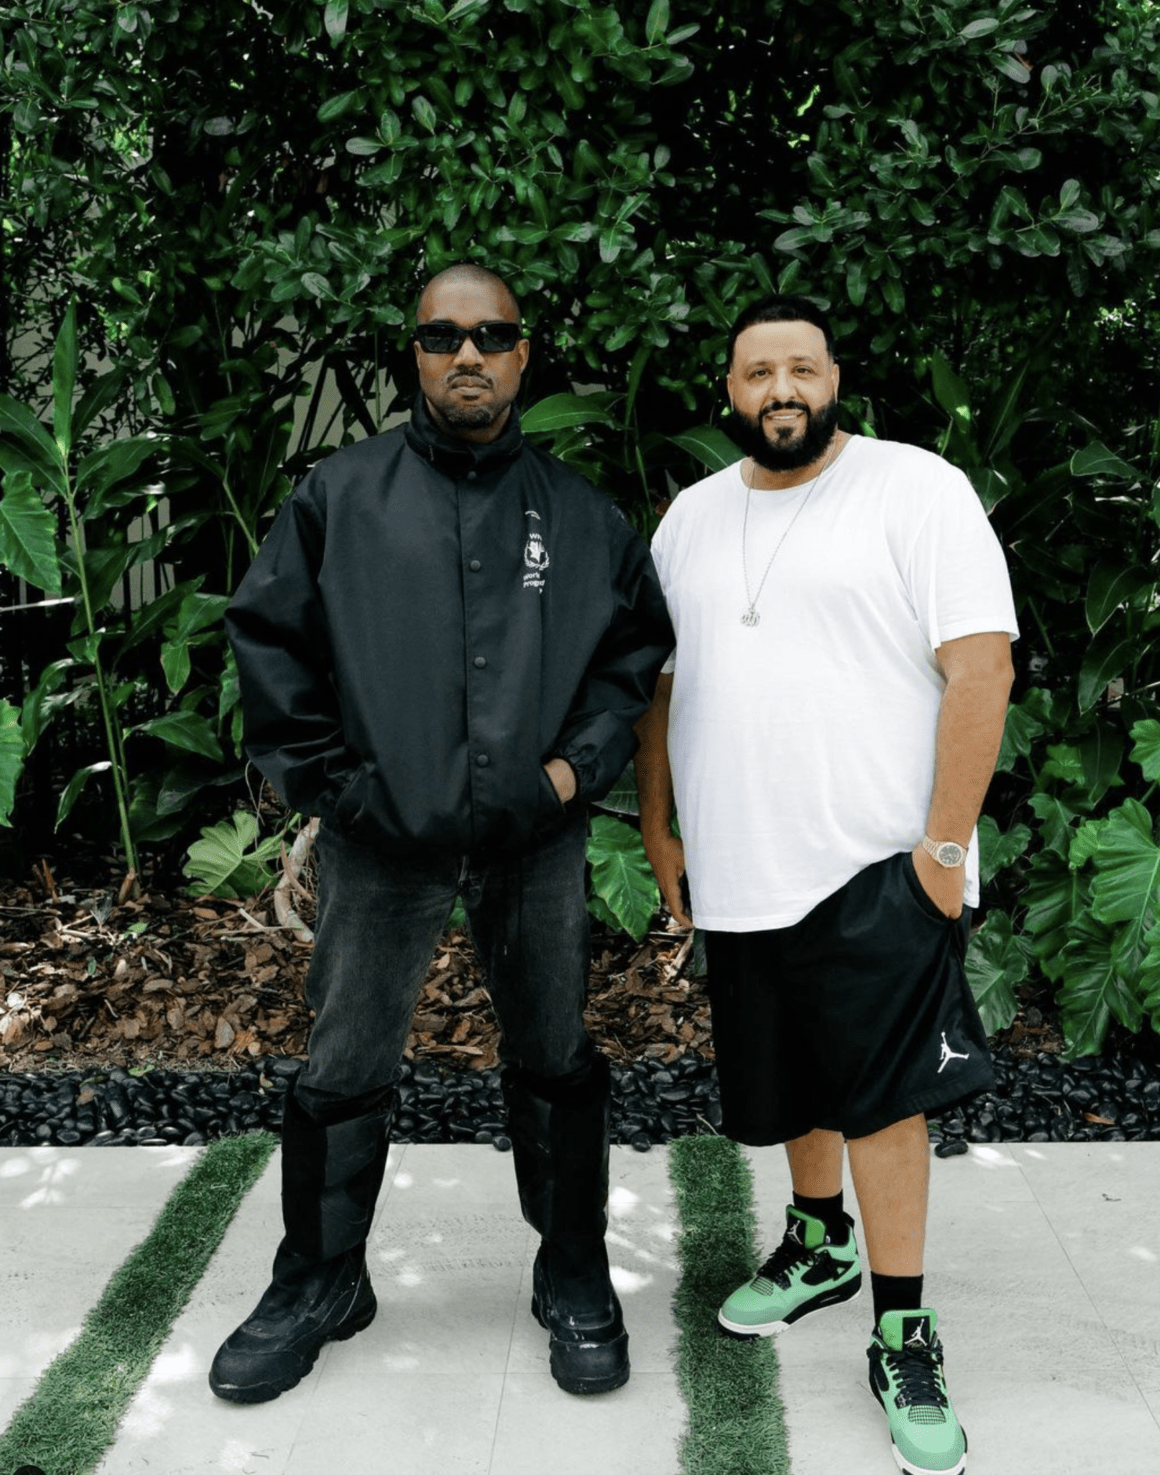 bao kanye west was surprised to receive a maybach landaulet from dj khaled on the day he assumed the role of director at louis vuitton 6549f61db9b3a Kanye West Was Surprised To Receive A Maybach 62 Landaulet From Dj Khaled On The Day He Assumed The Role Of Director At Louis Vuitton